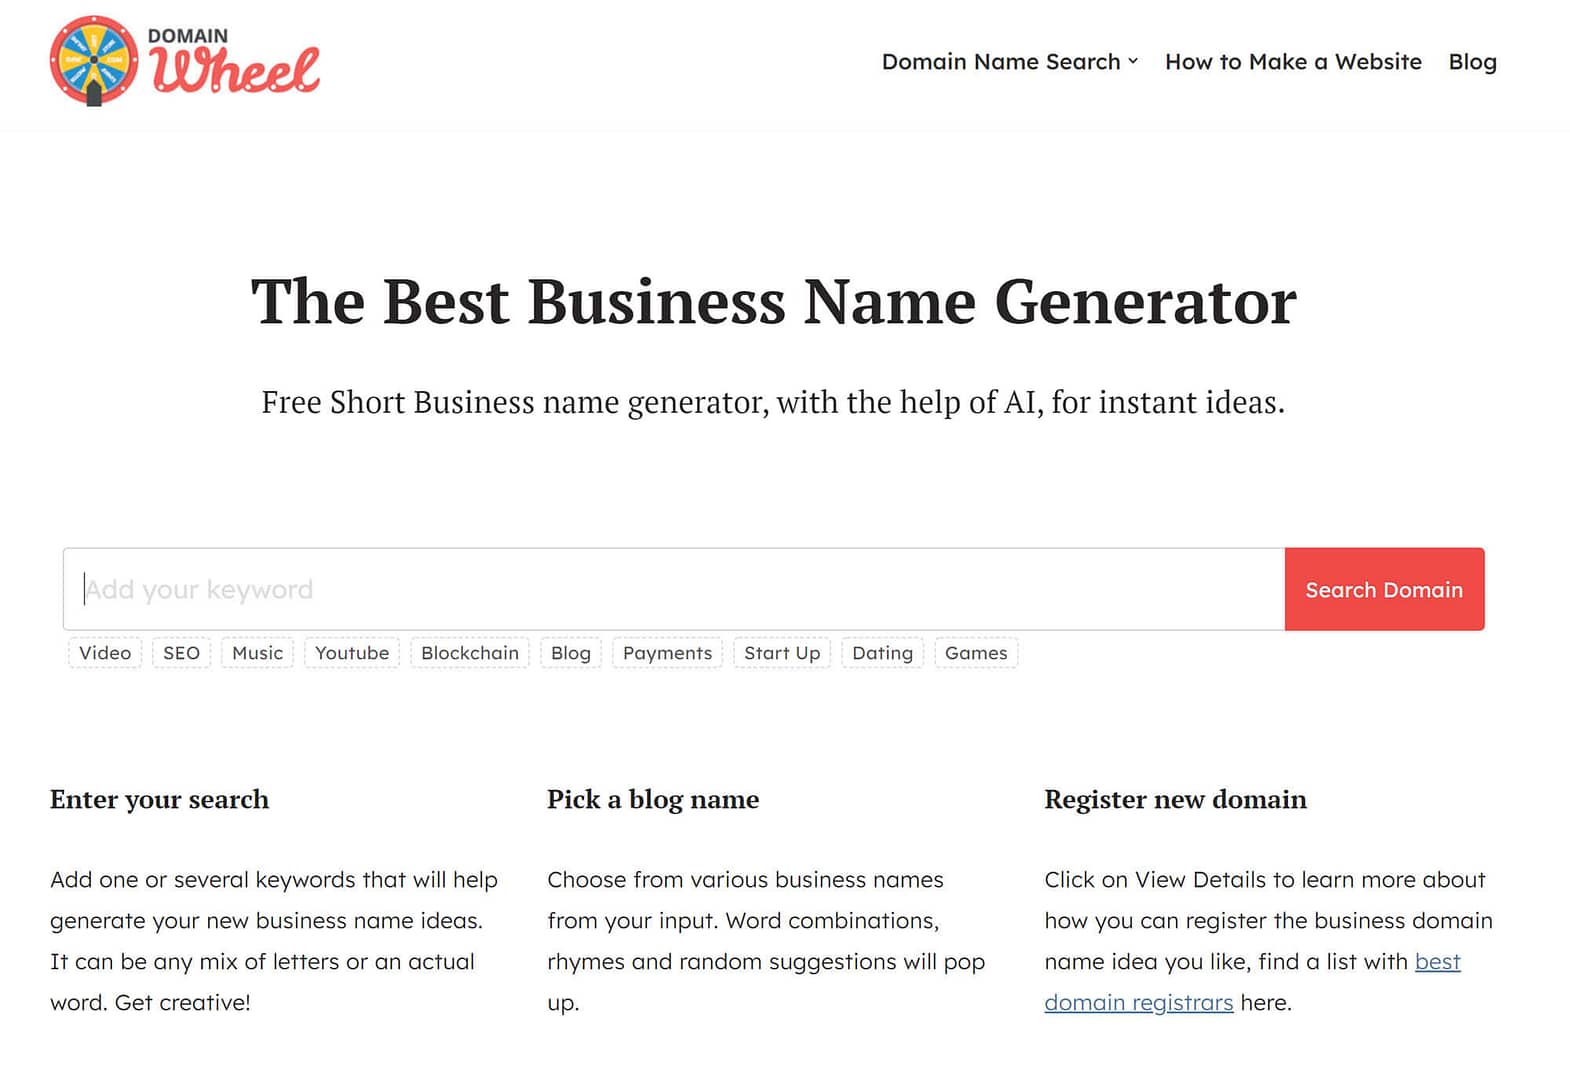 How to come up with a business name: DomainWheel business name generator front page